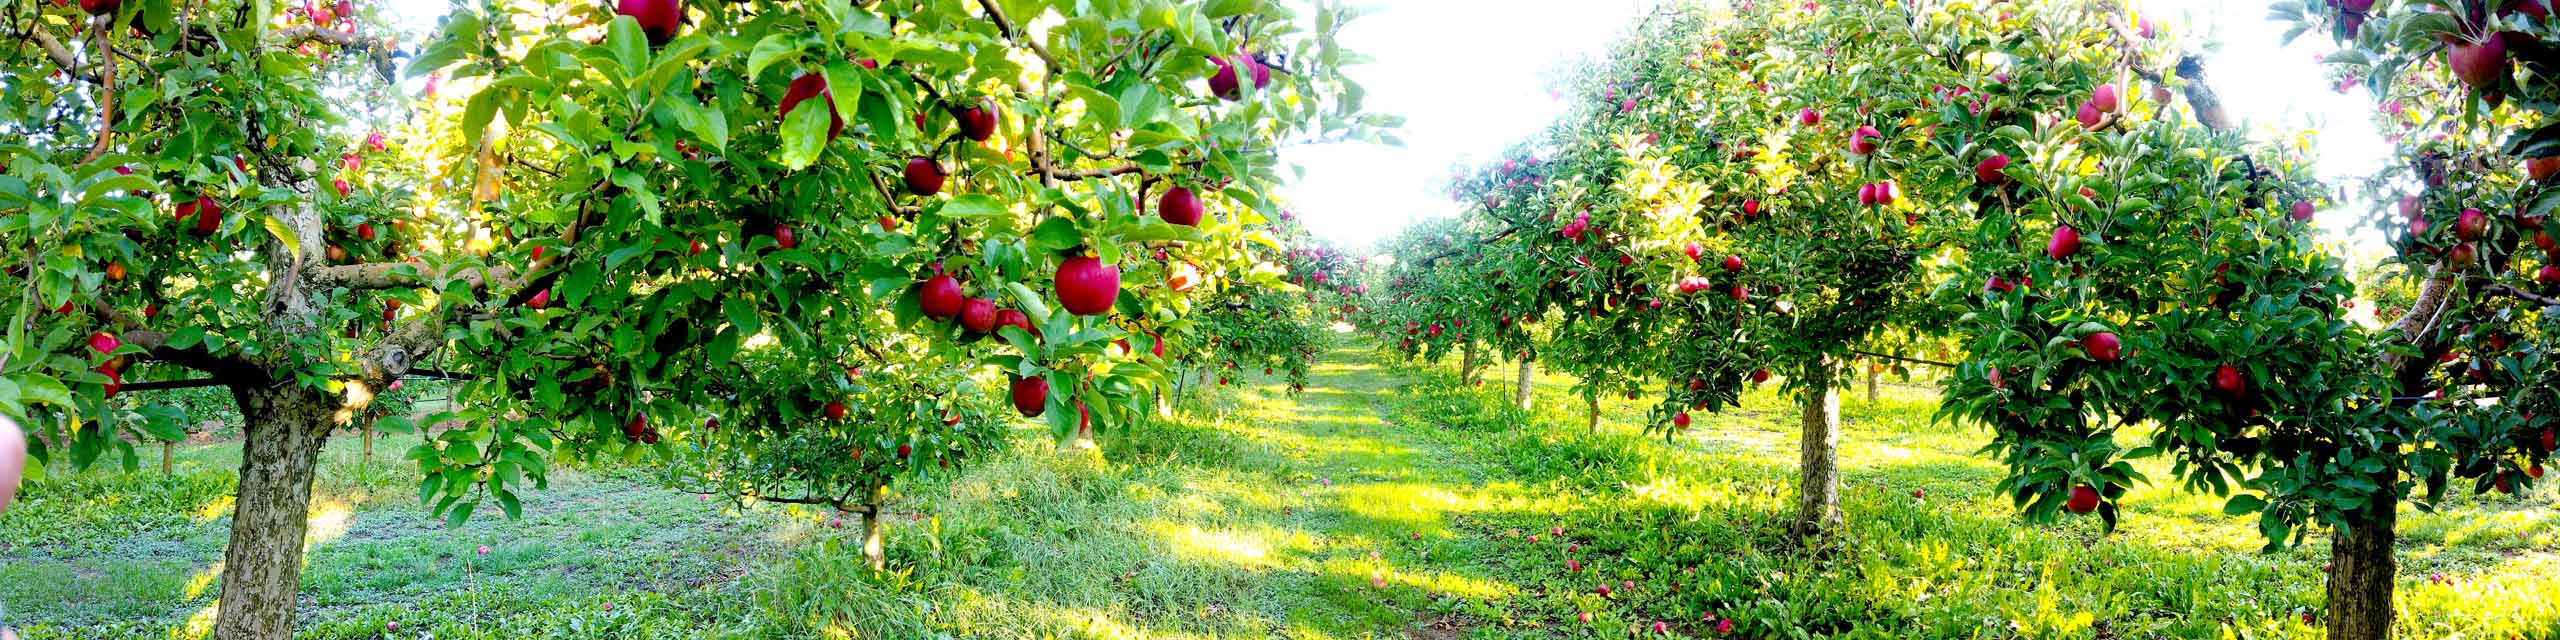 Rows of apple trees with fruit in an orchard.